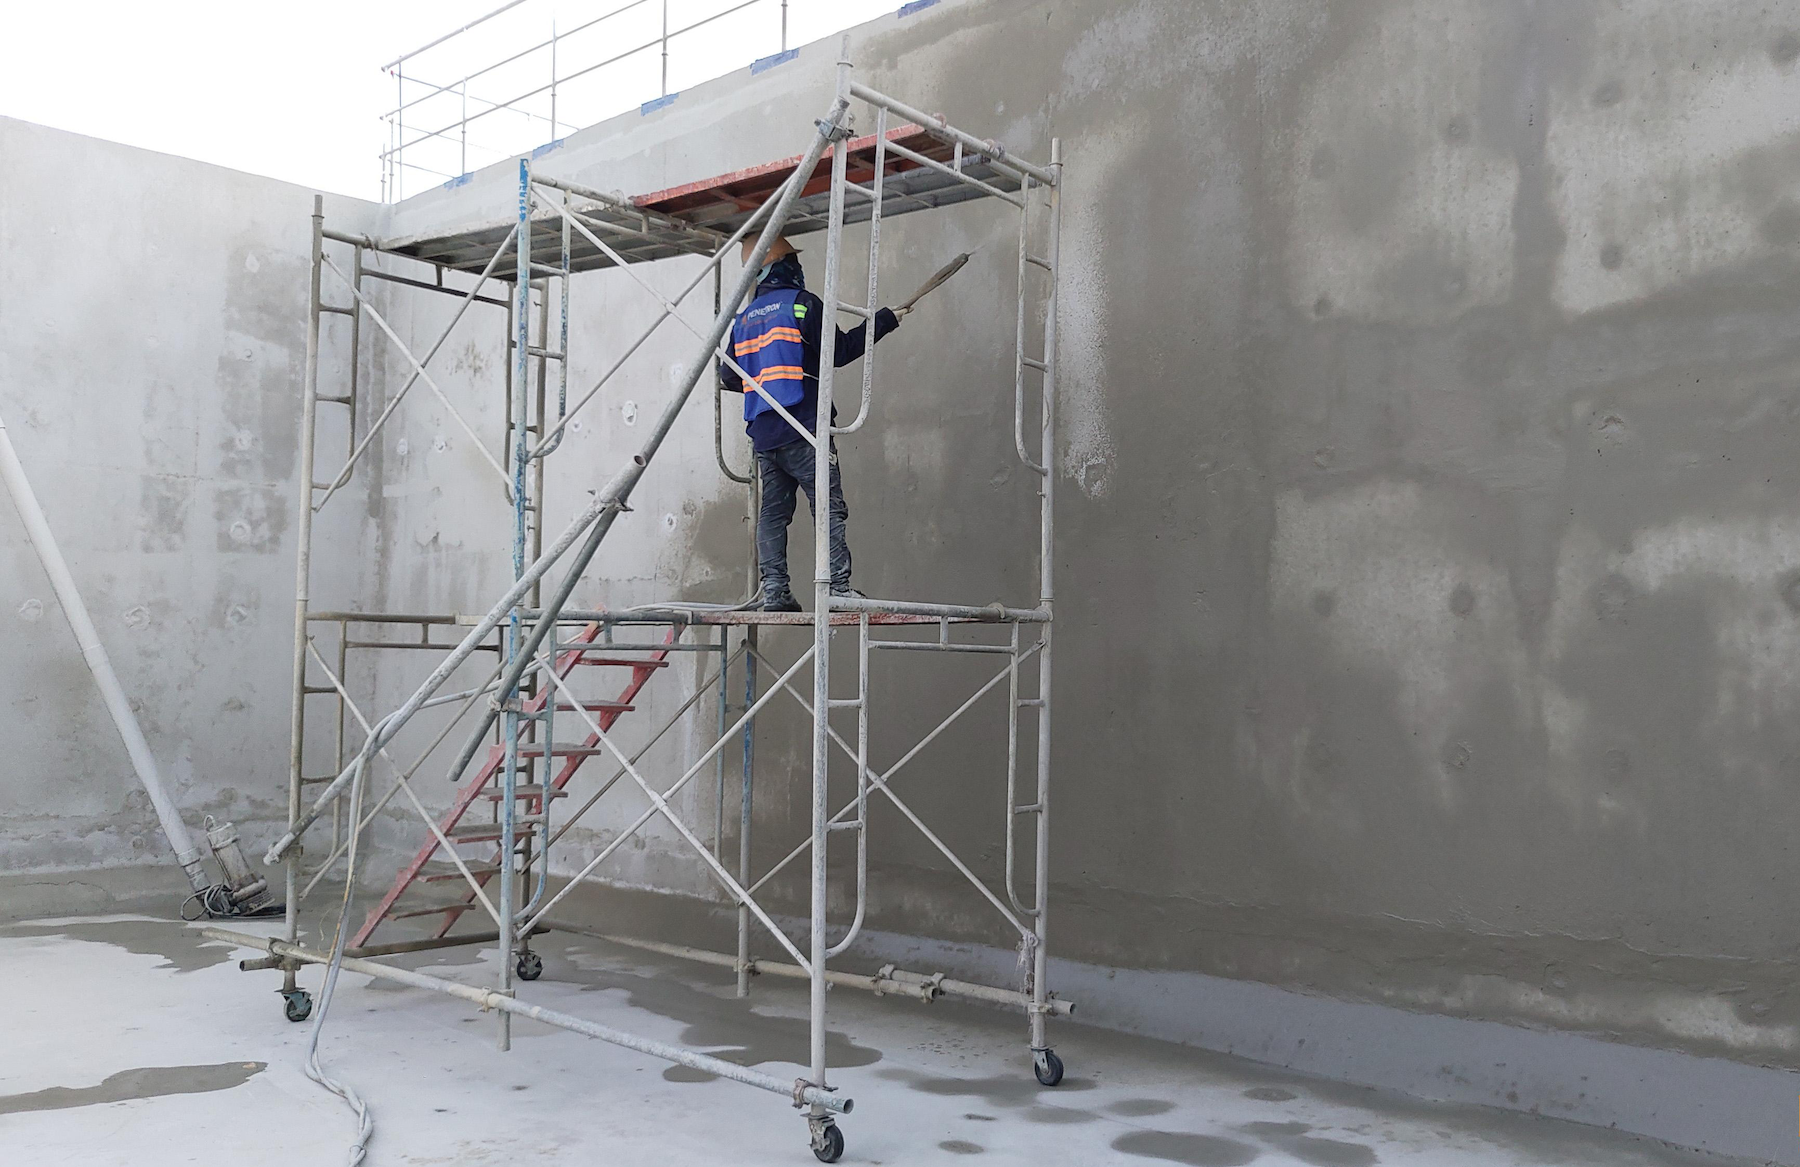 Permanent protection: Brushed or sprayed on concrete surfaces from the positive or negative side, PENETRON is used for waterproofing and chemical protection of concrete.